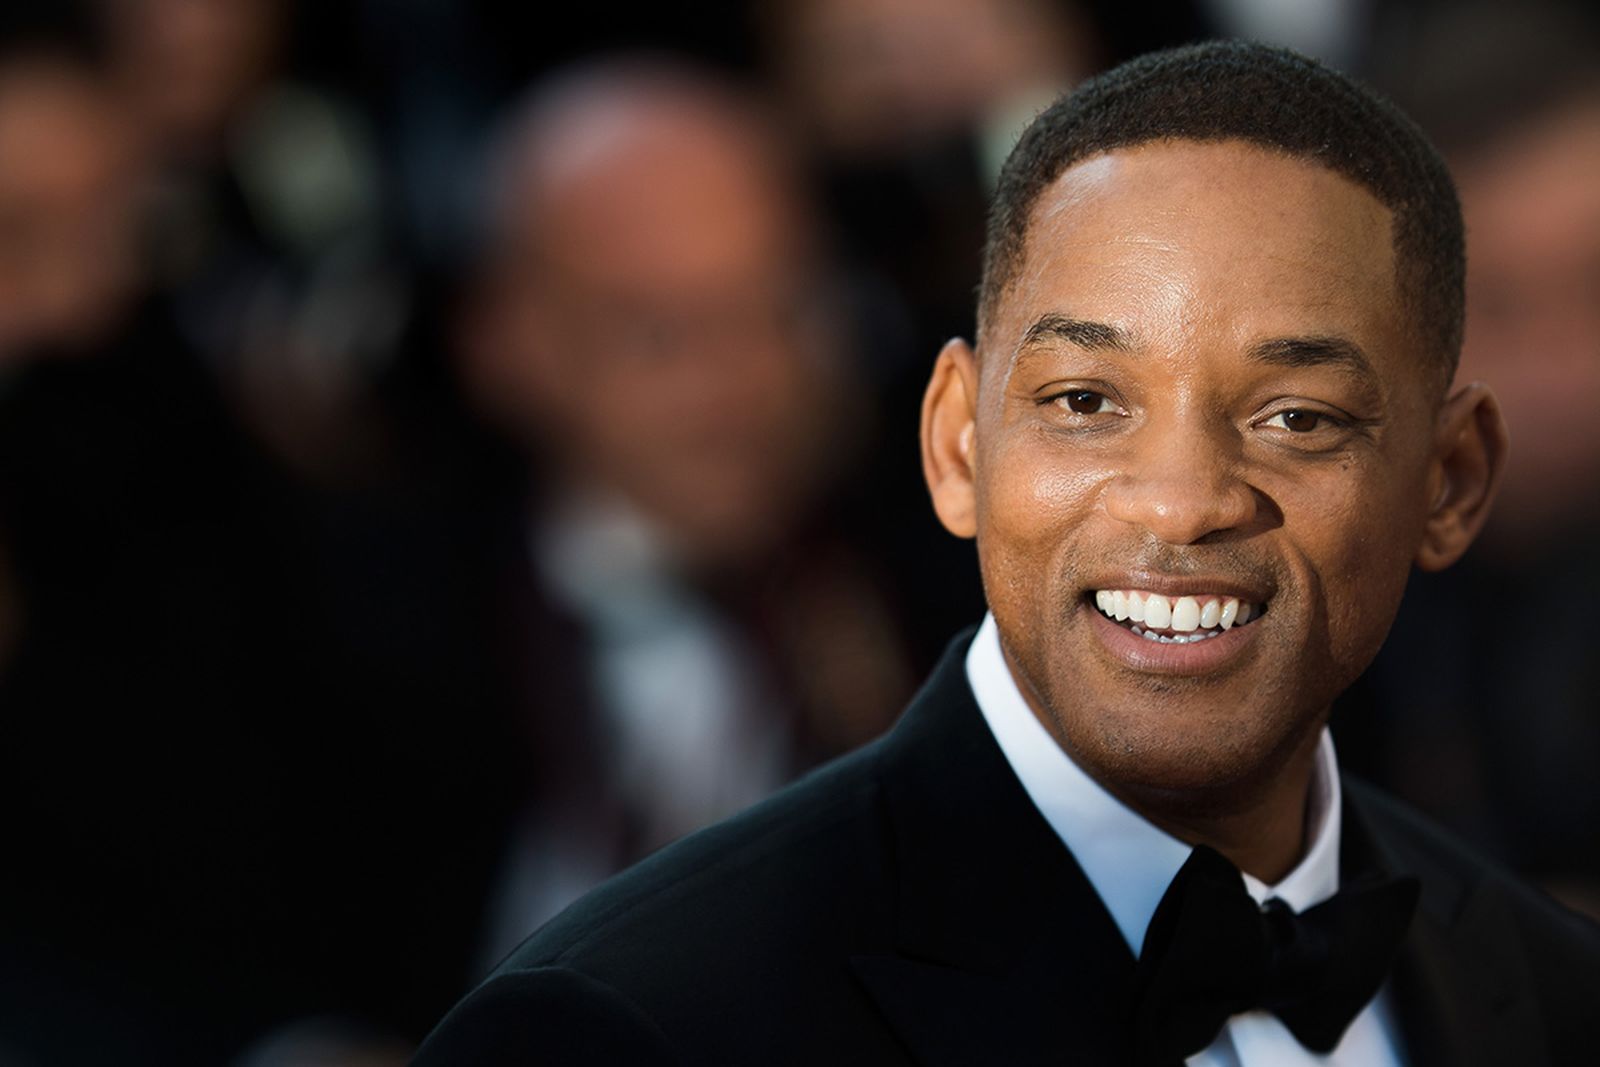 Will Smith smiling red carpet